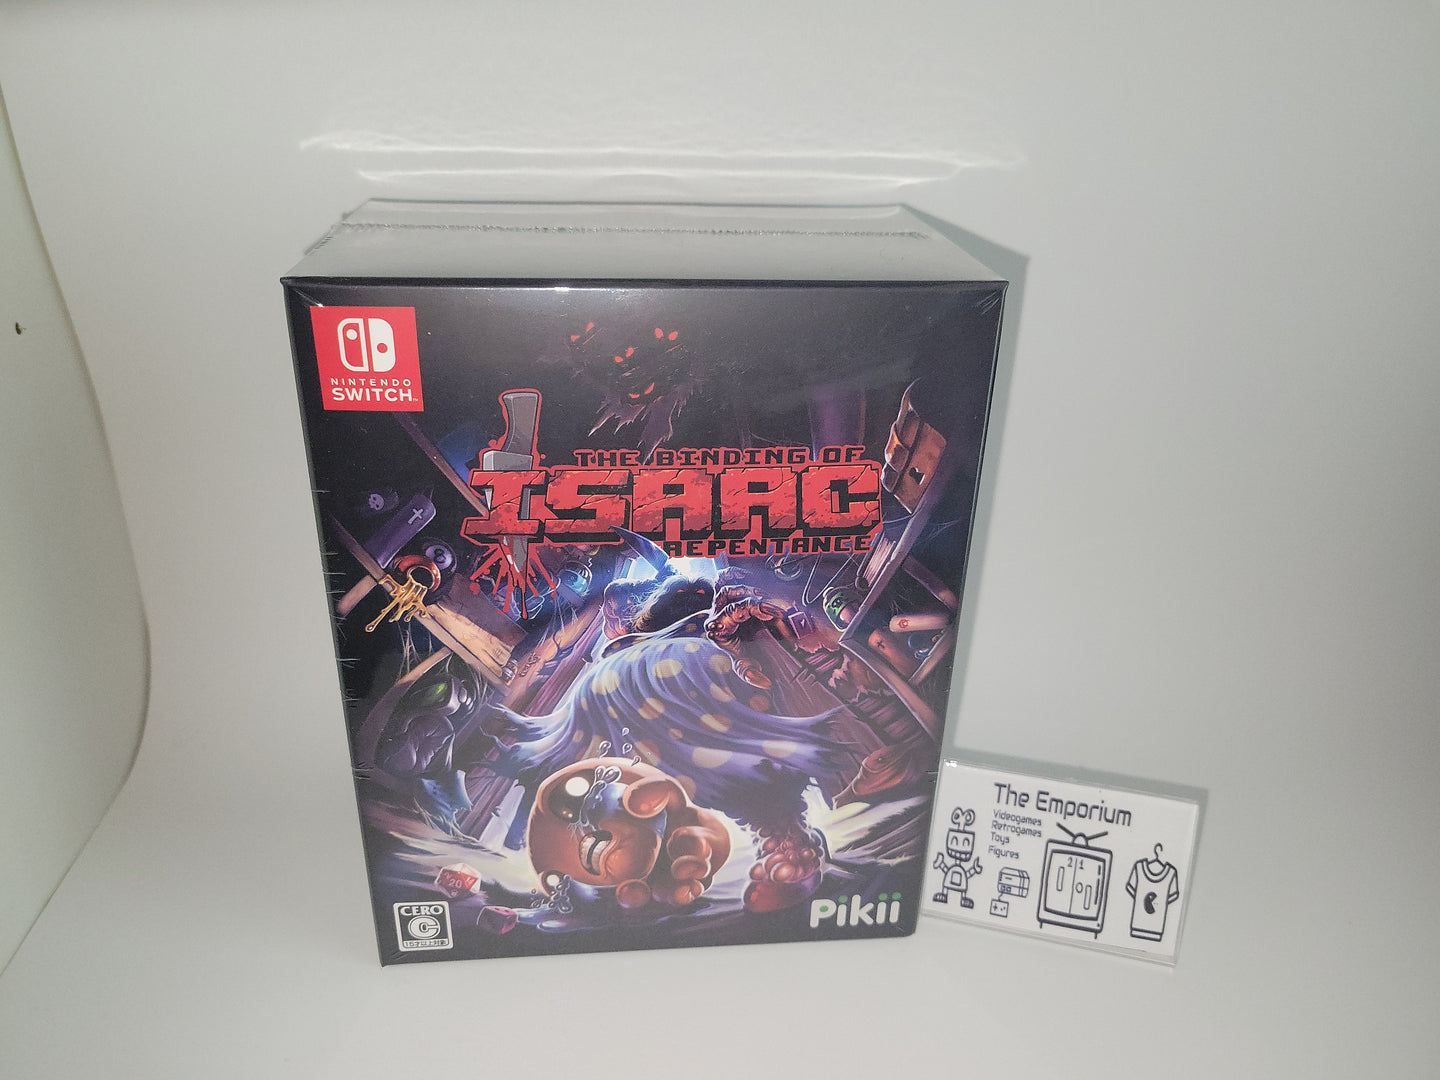 The Binding of Isaac Afterbirth + Nintendo Switch Video Game Original